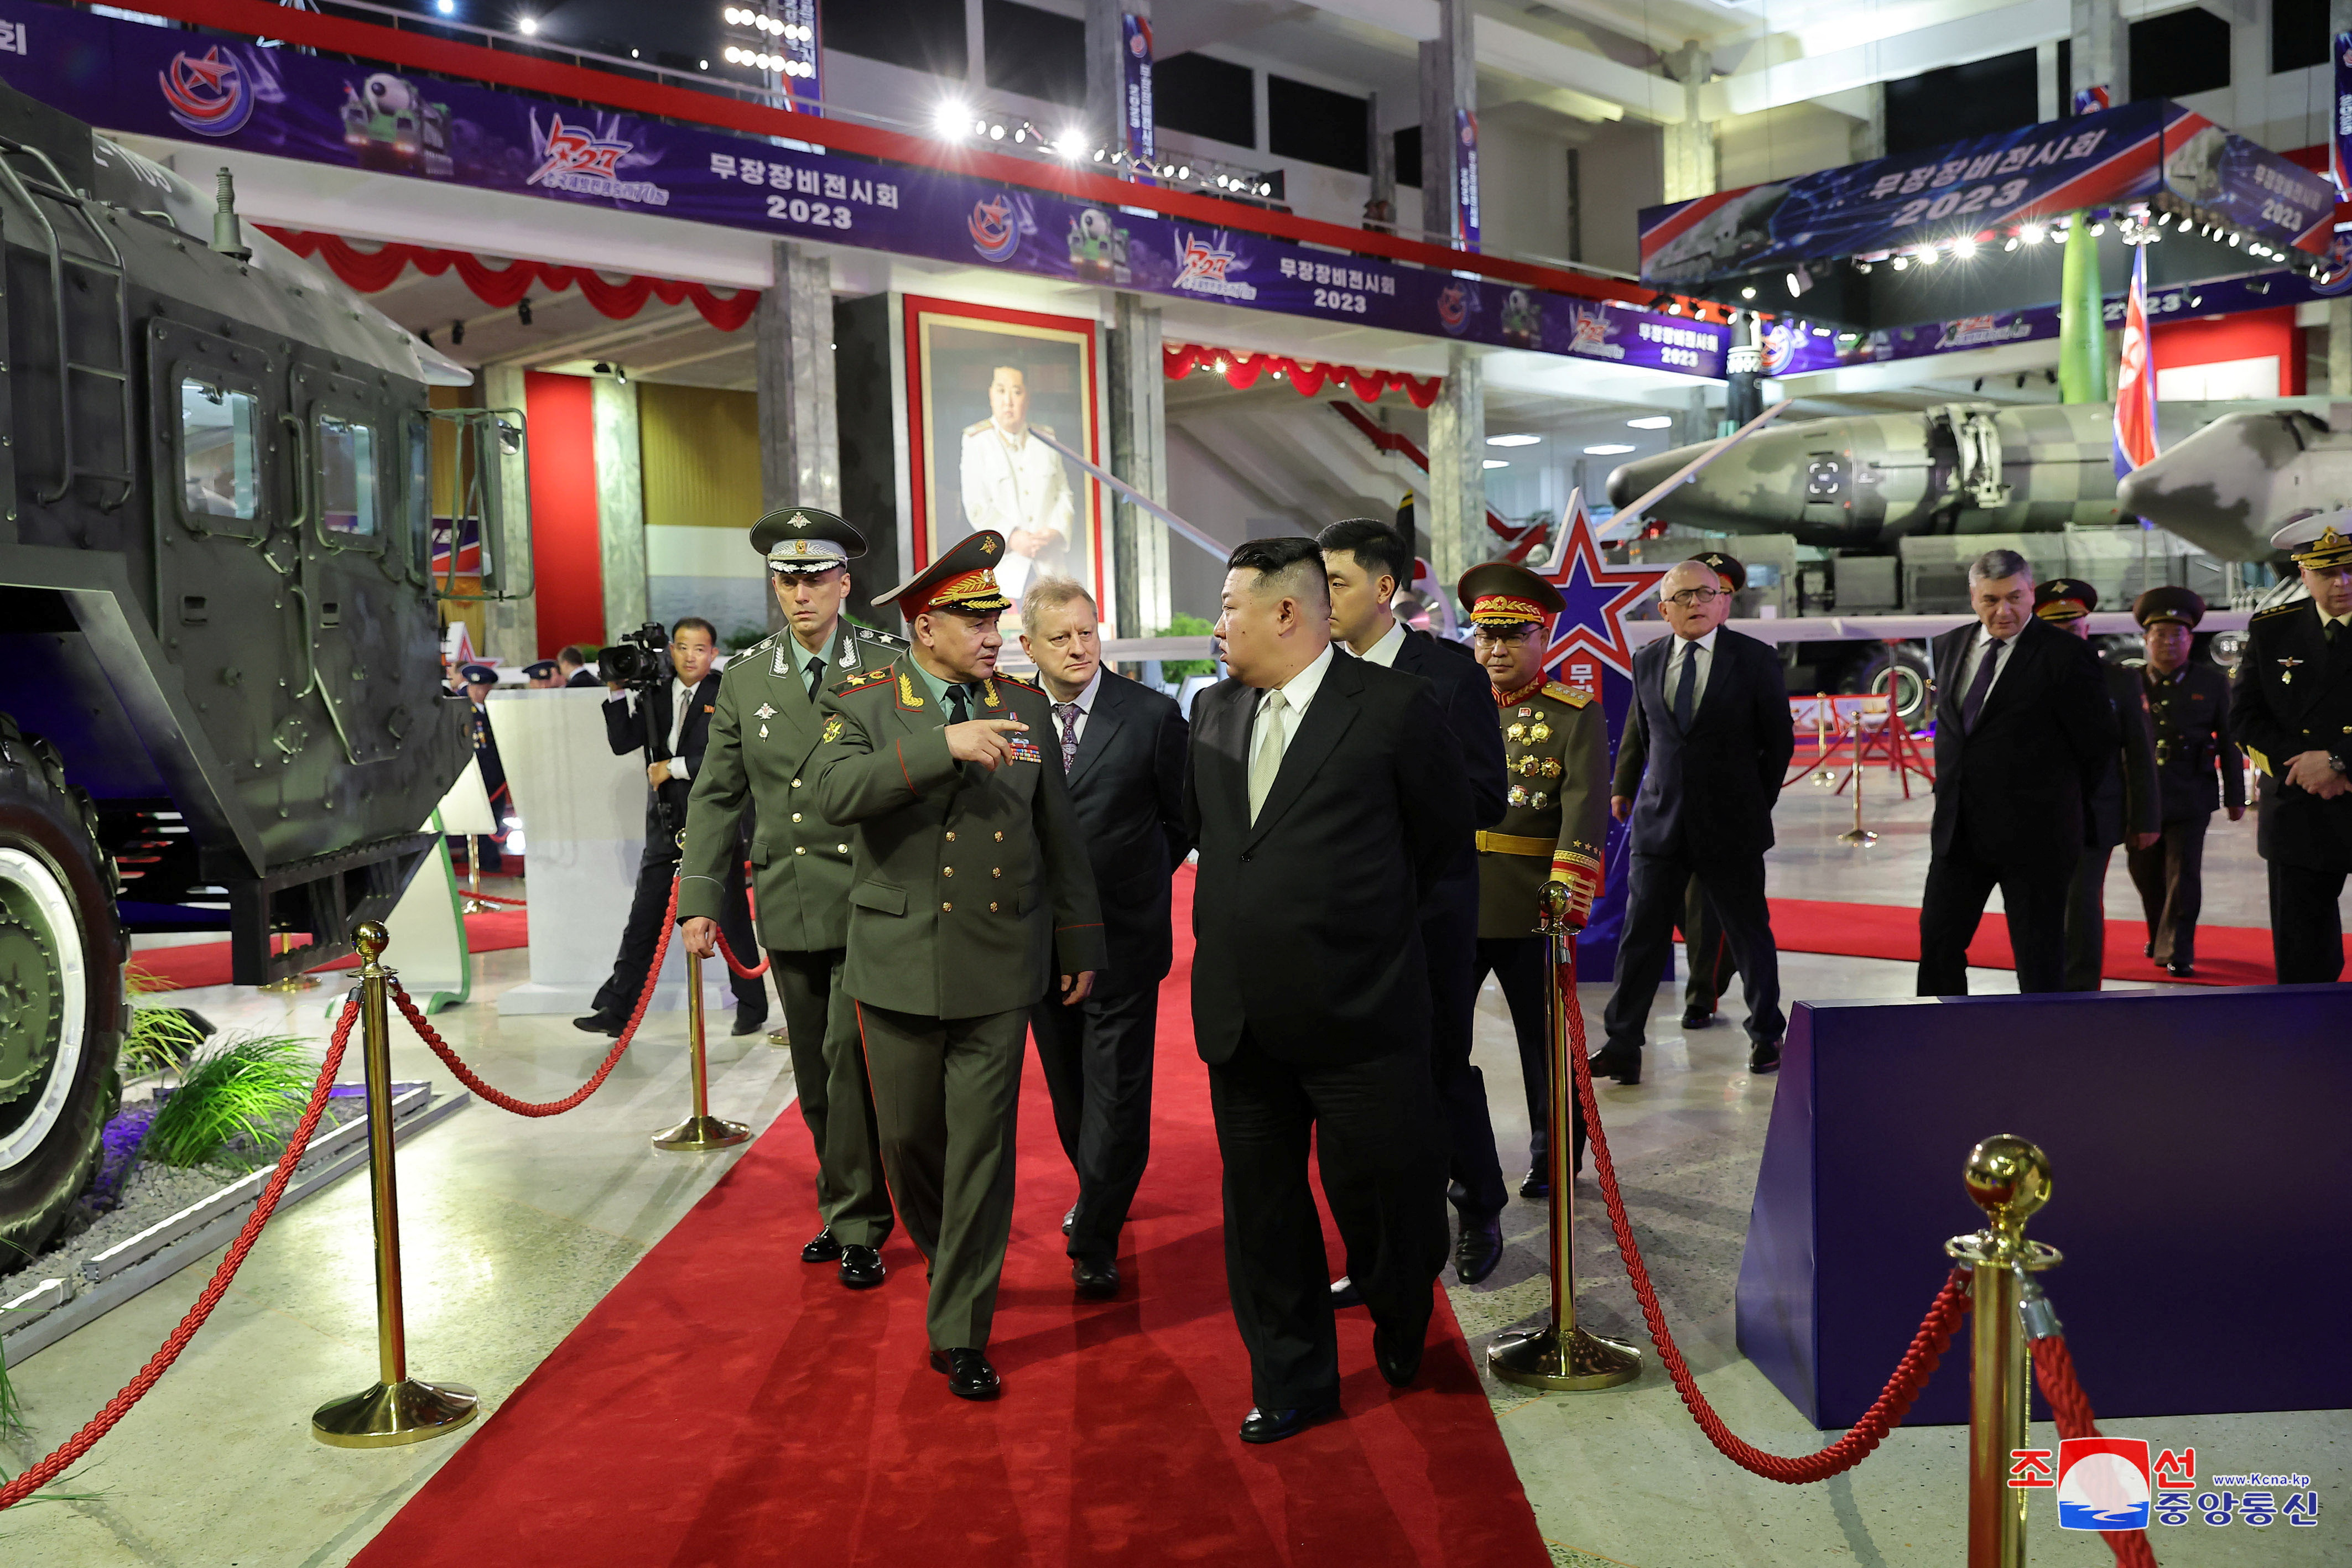 North Korean leader Kim Jong Un and Russia's Defense Minister Sergei Shoigu visit an exhibition of armed equipment